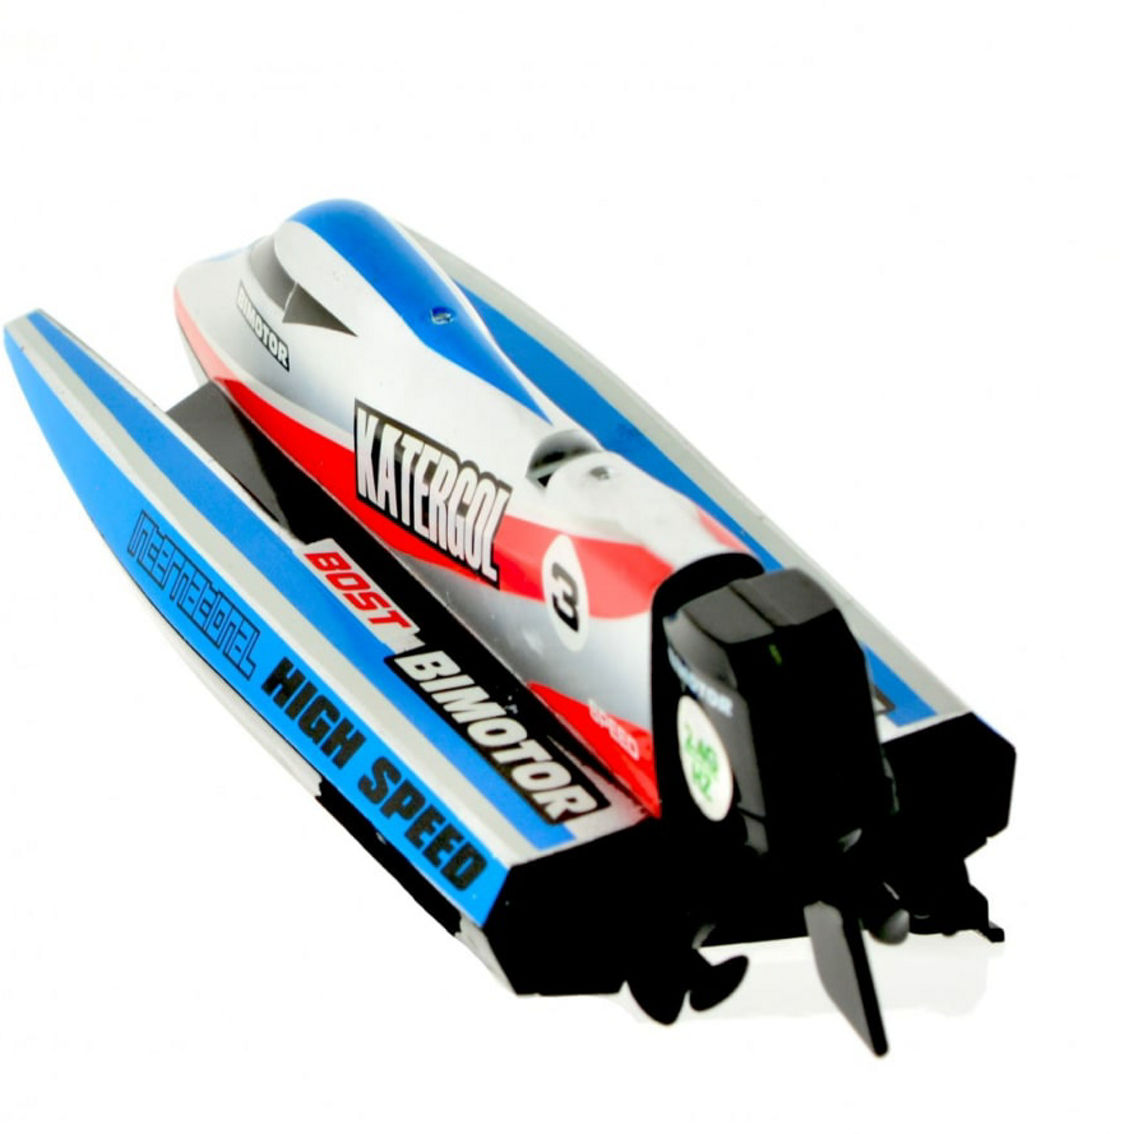 CIS-3313M-B Micro 2.4 Ghz Formula 1 speed boat with decals 2 colors Red and Blue - Image 5 of 5